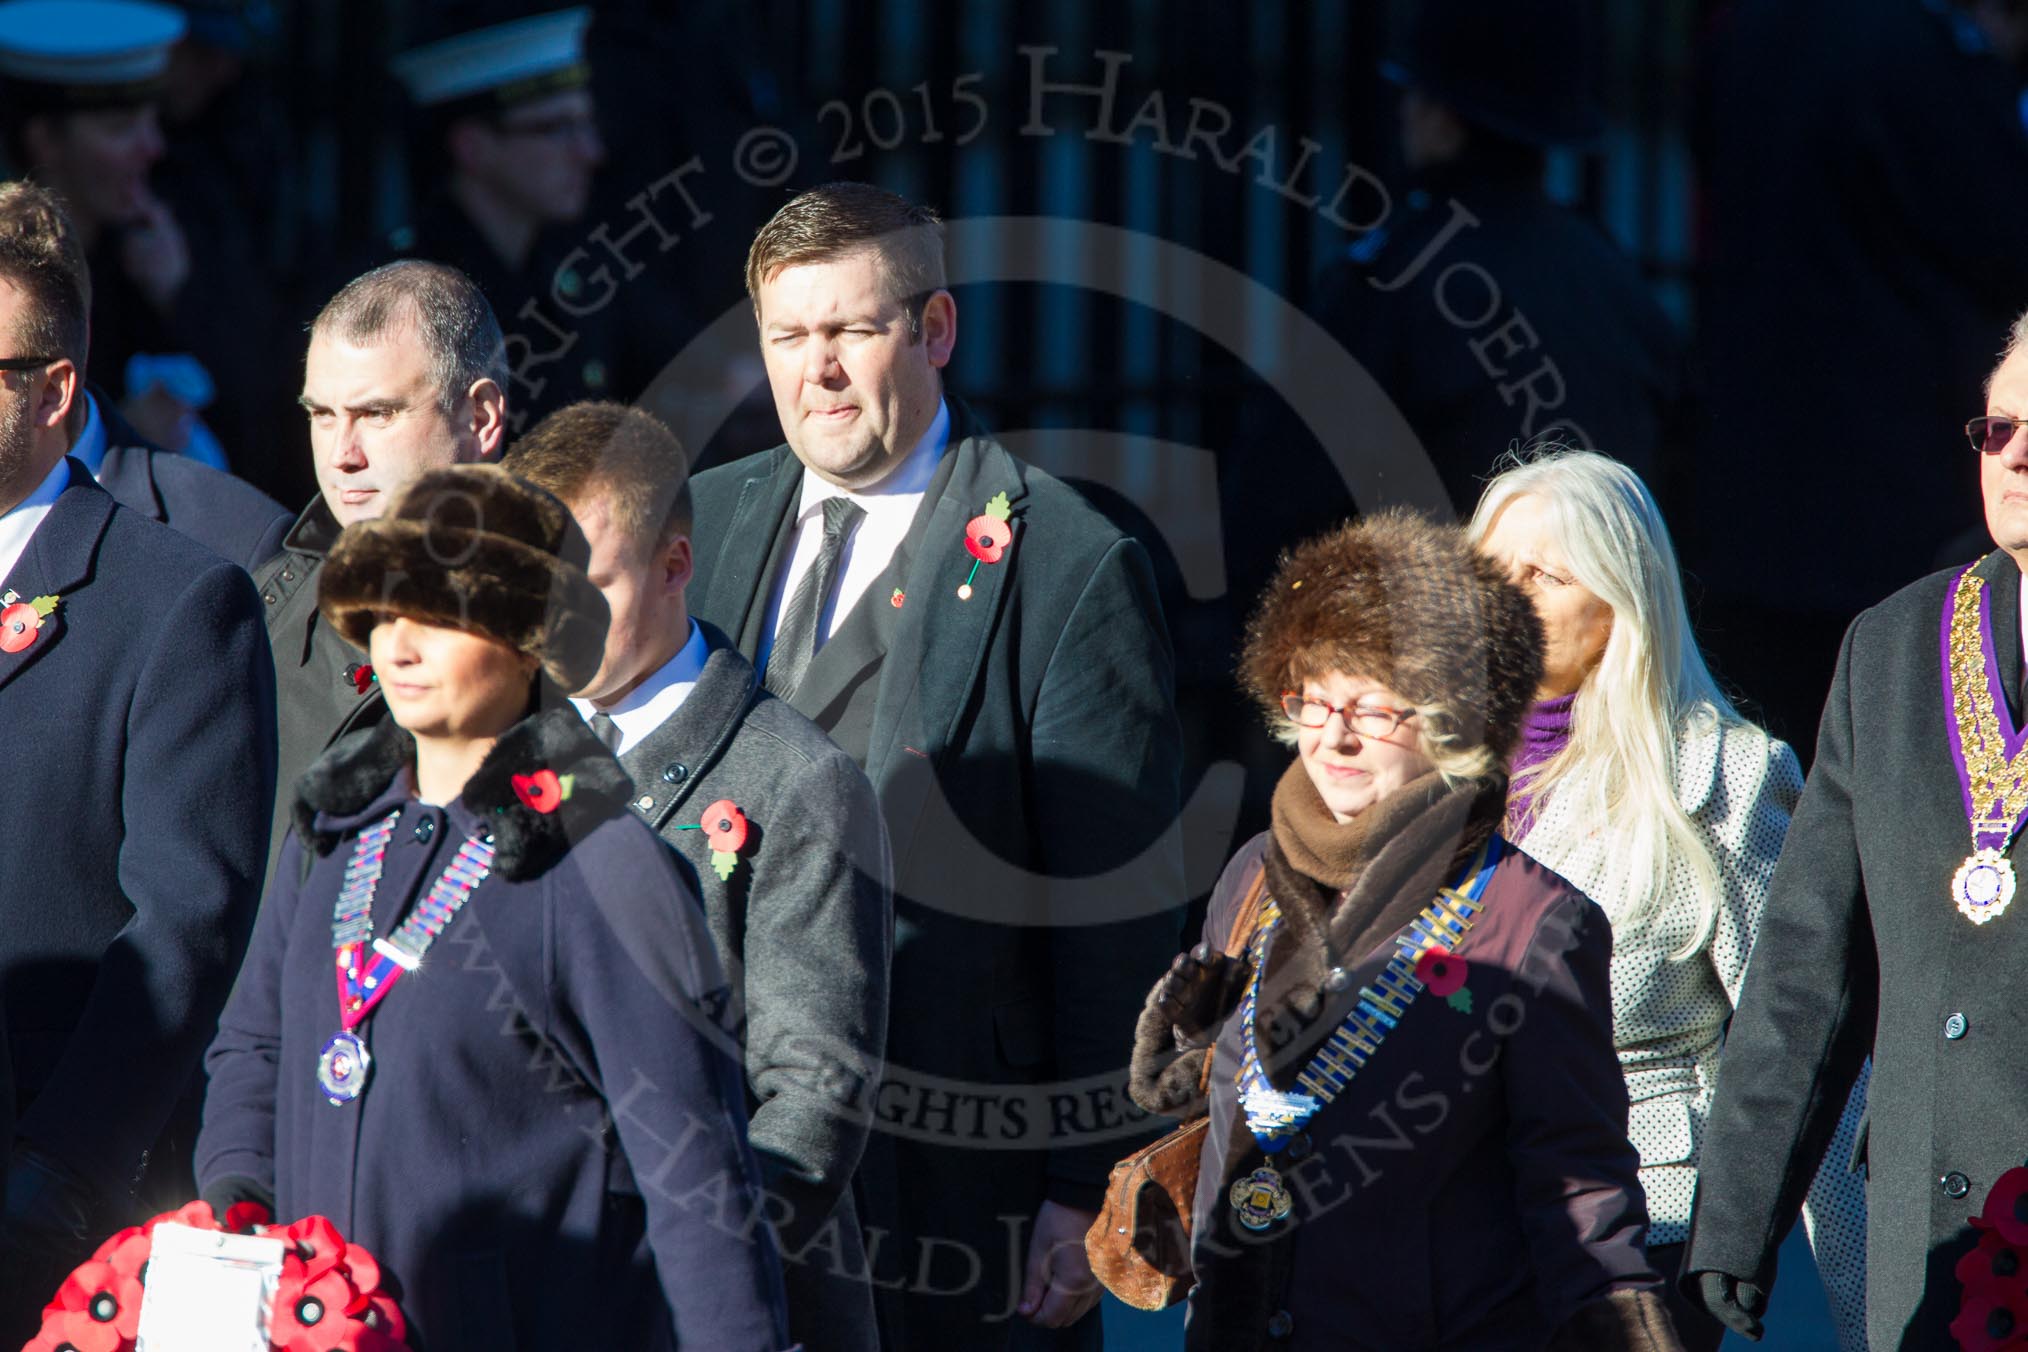 Remembrance Sunday Cenotaph March Past 2013: M39 - National Association of Round Tables..
Press stand opposite the Foreign Office building, Whitehall, London SW1,
London,
Greater London,
United Kingdom,
on 10 November 2013 at 12:14, image #2176